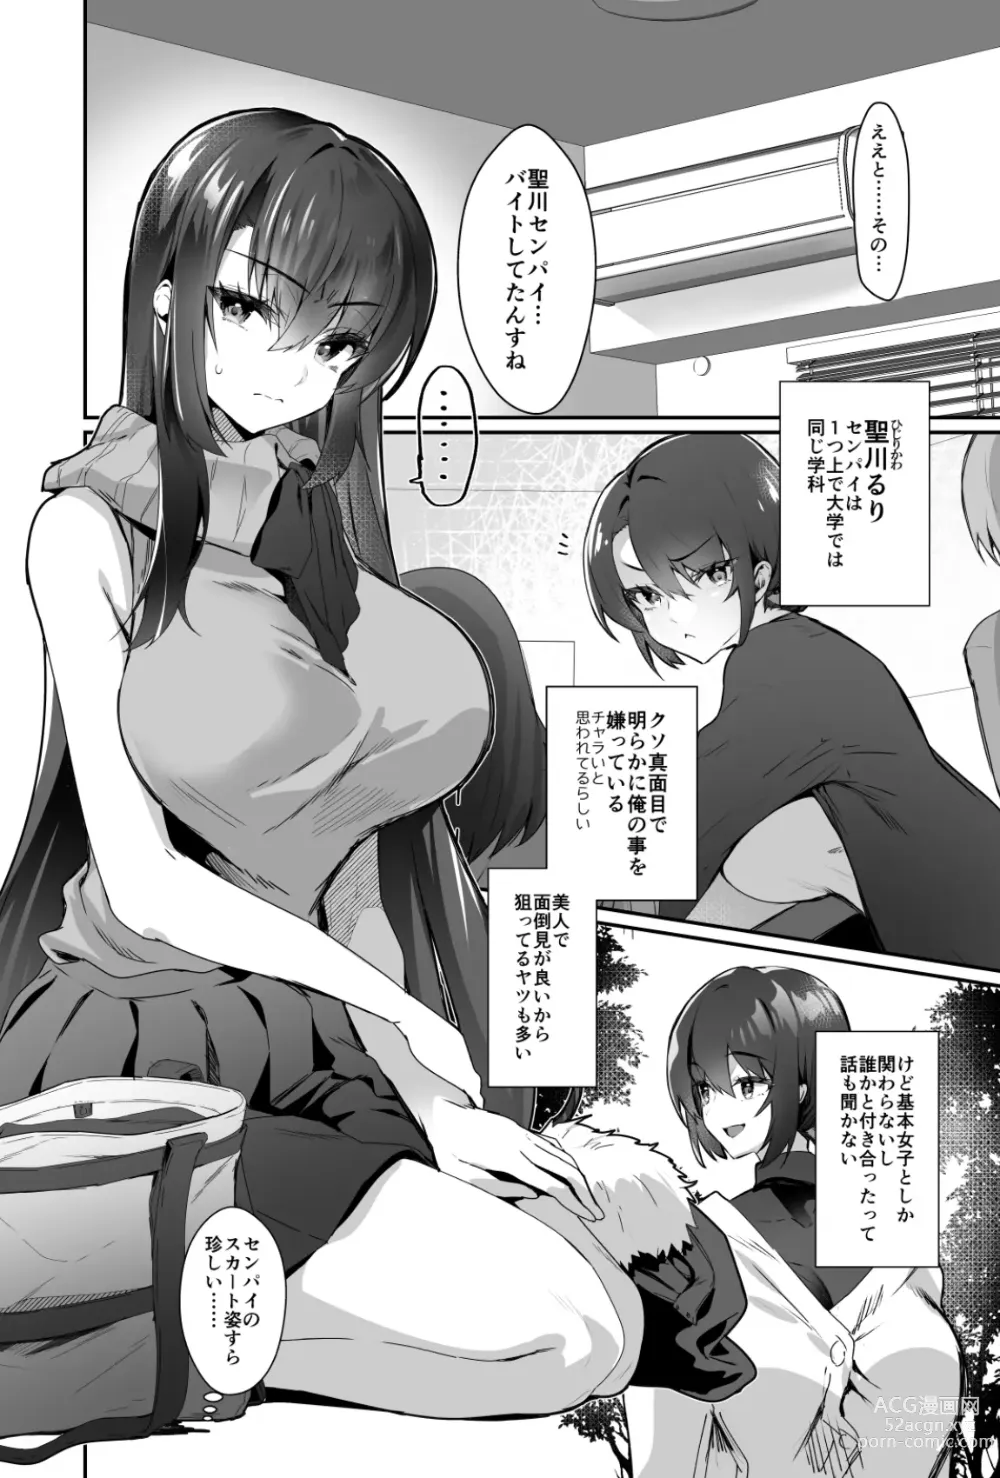 Page 5 of doujinshi Oppai Maid Delivery  2